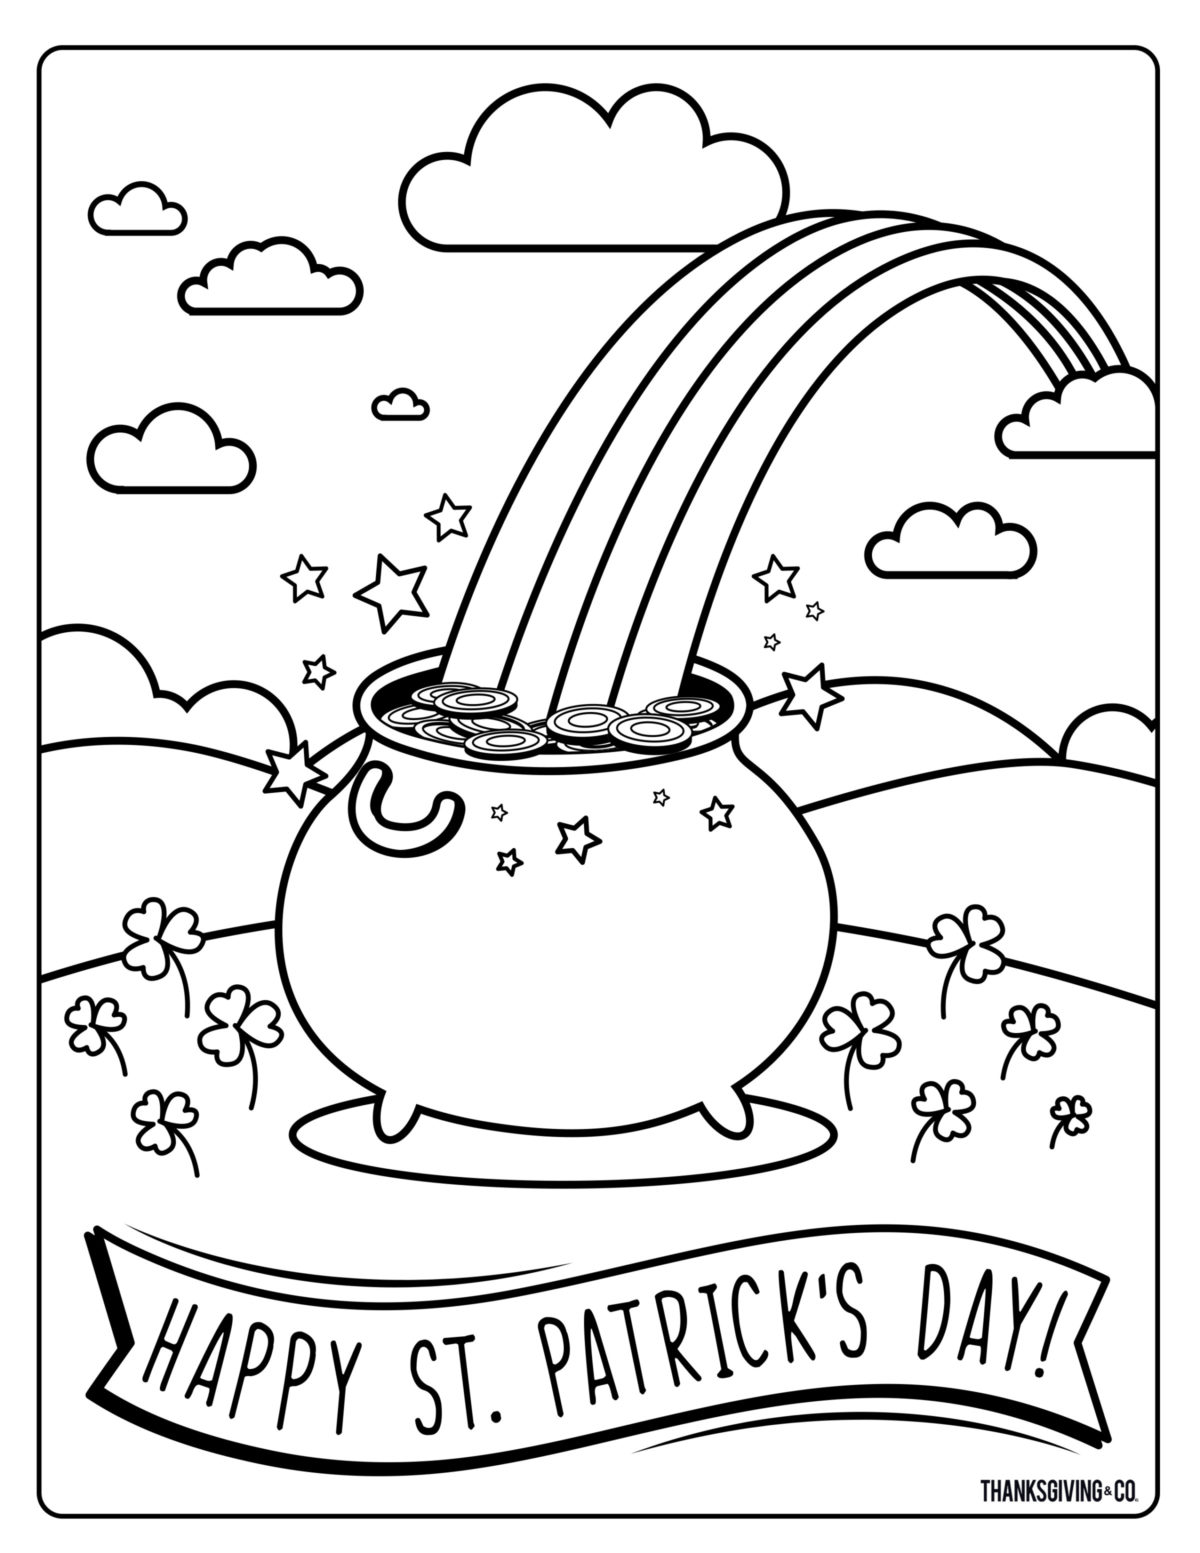 6 printable, whimsical St. Patrick's Day coloring pages ...